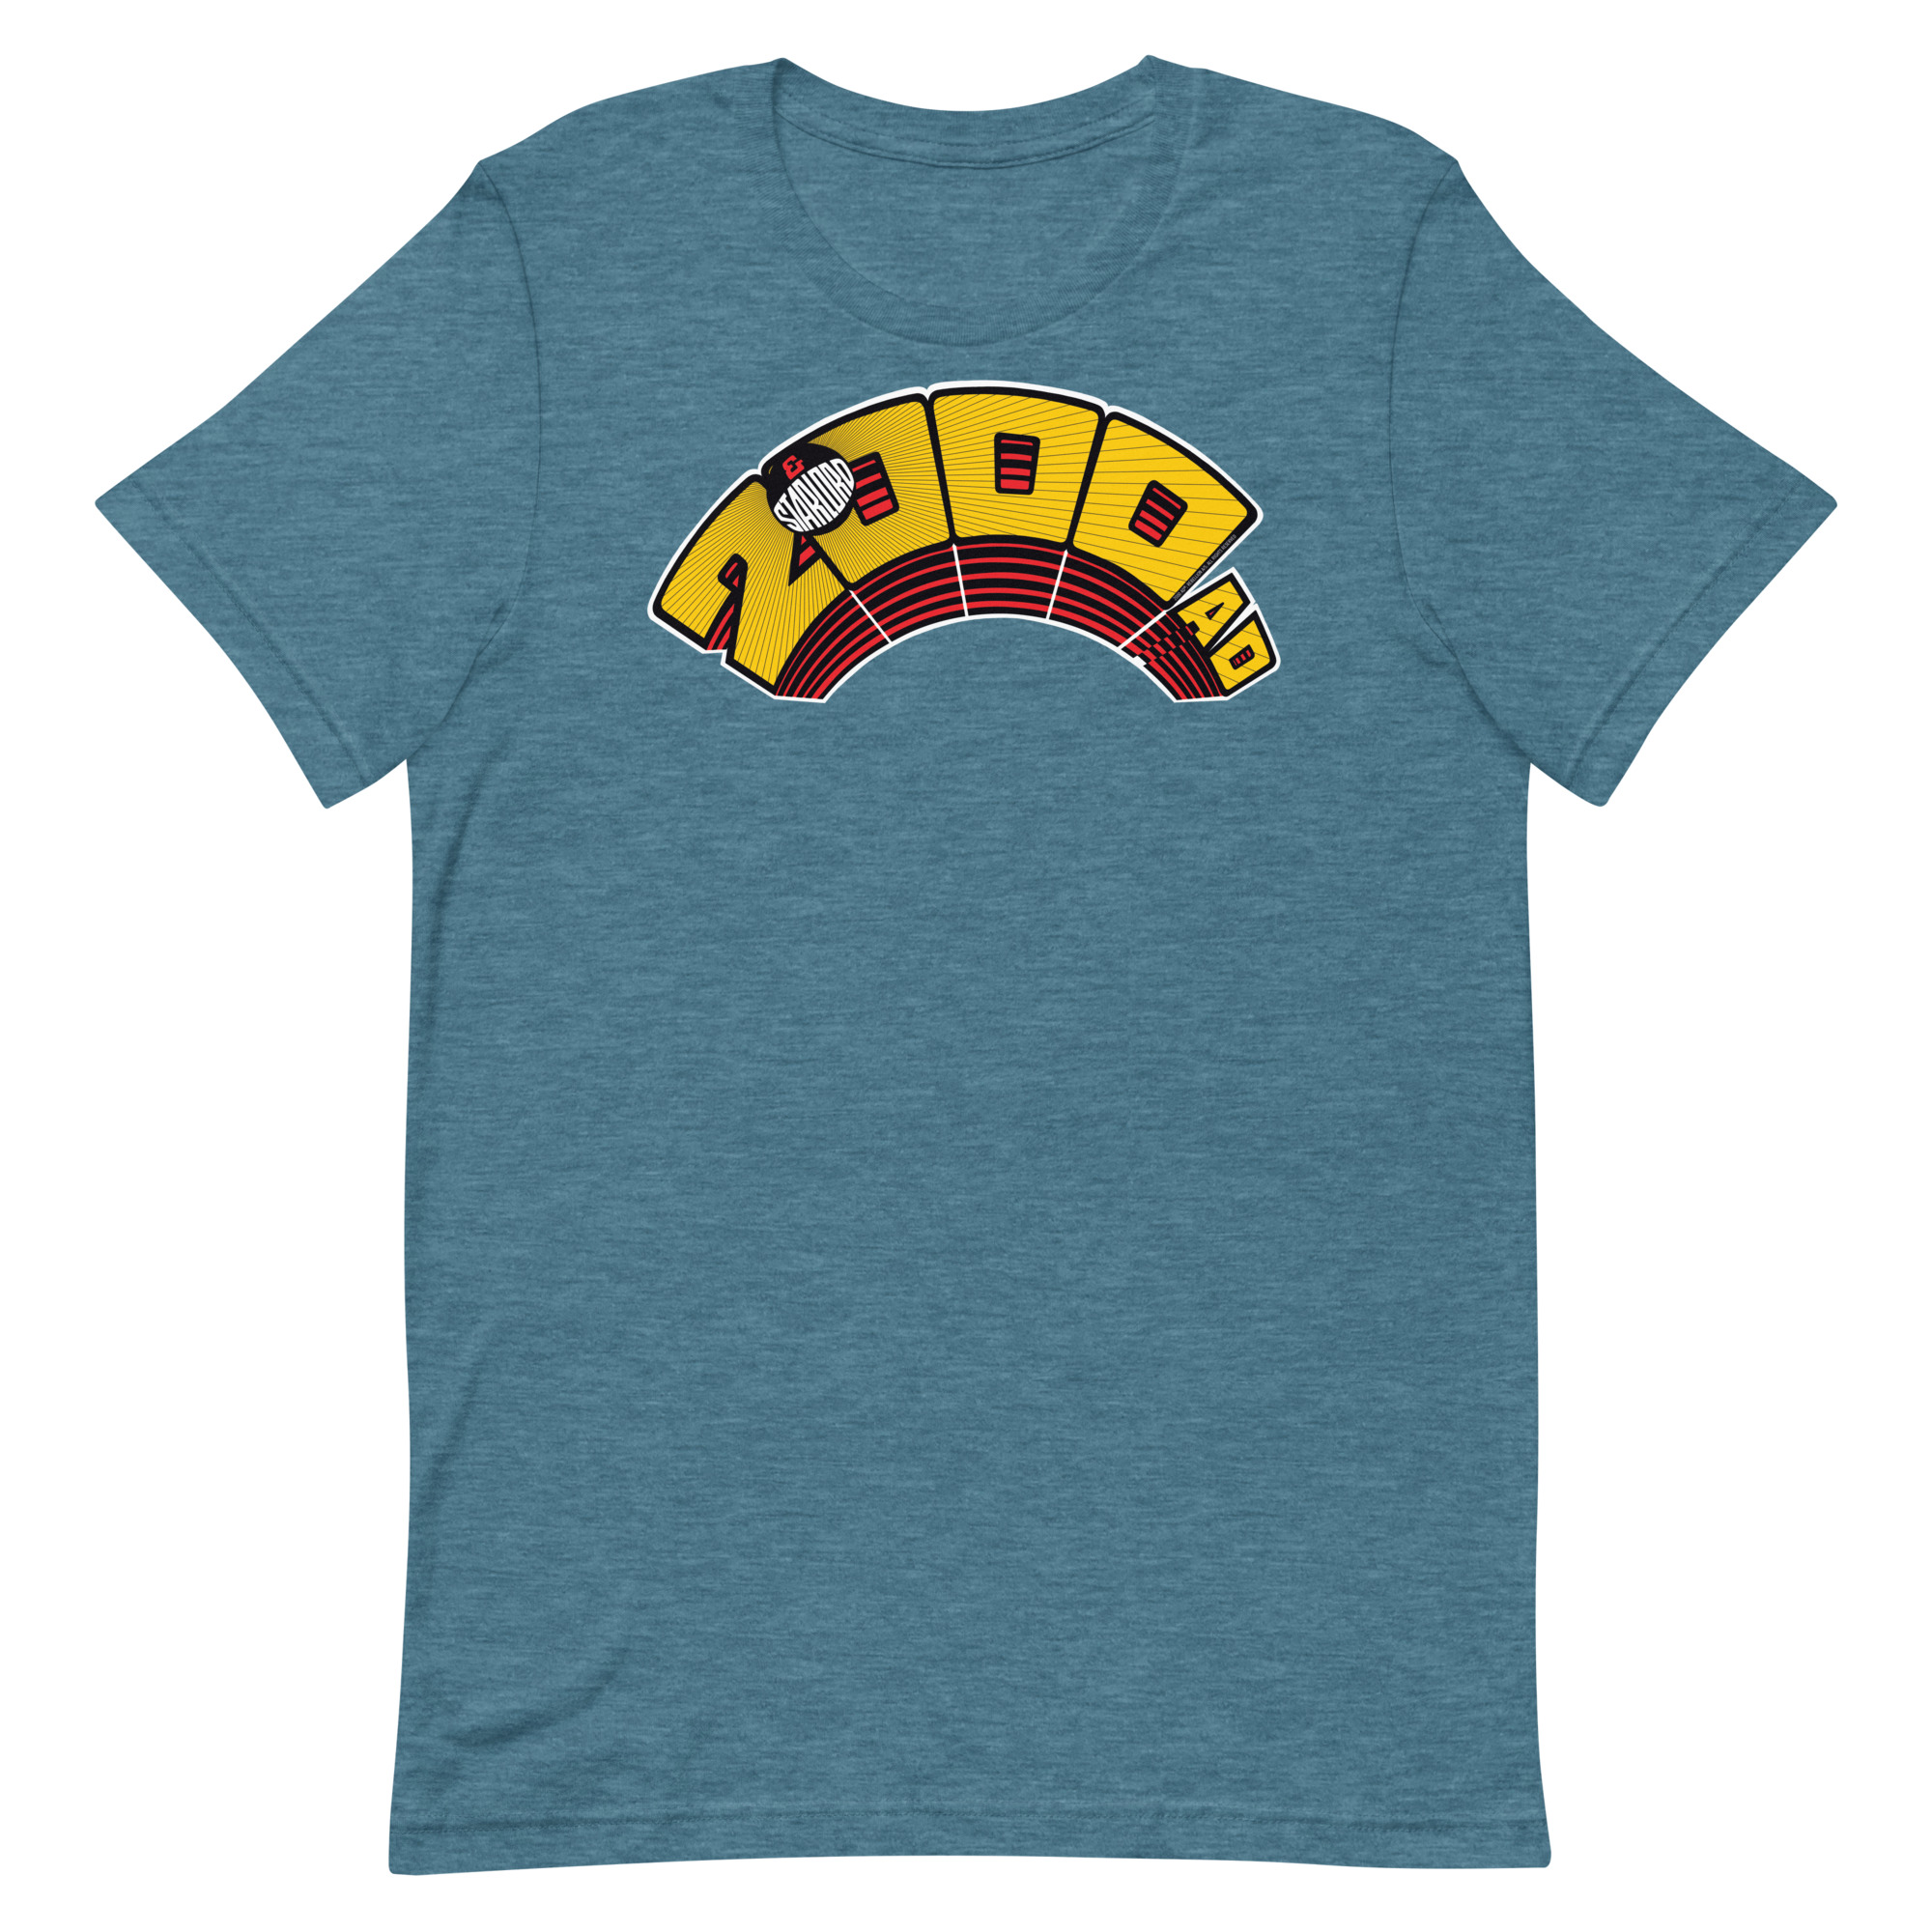 Image of a Deap Teal coloured 2000AD Starlord Arch t-shirt featuring a large 2000AD Starlord Arch logo in the middle